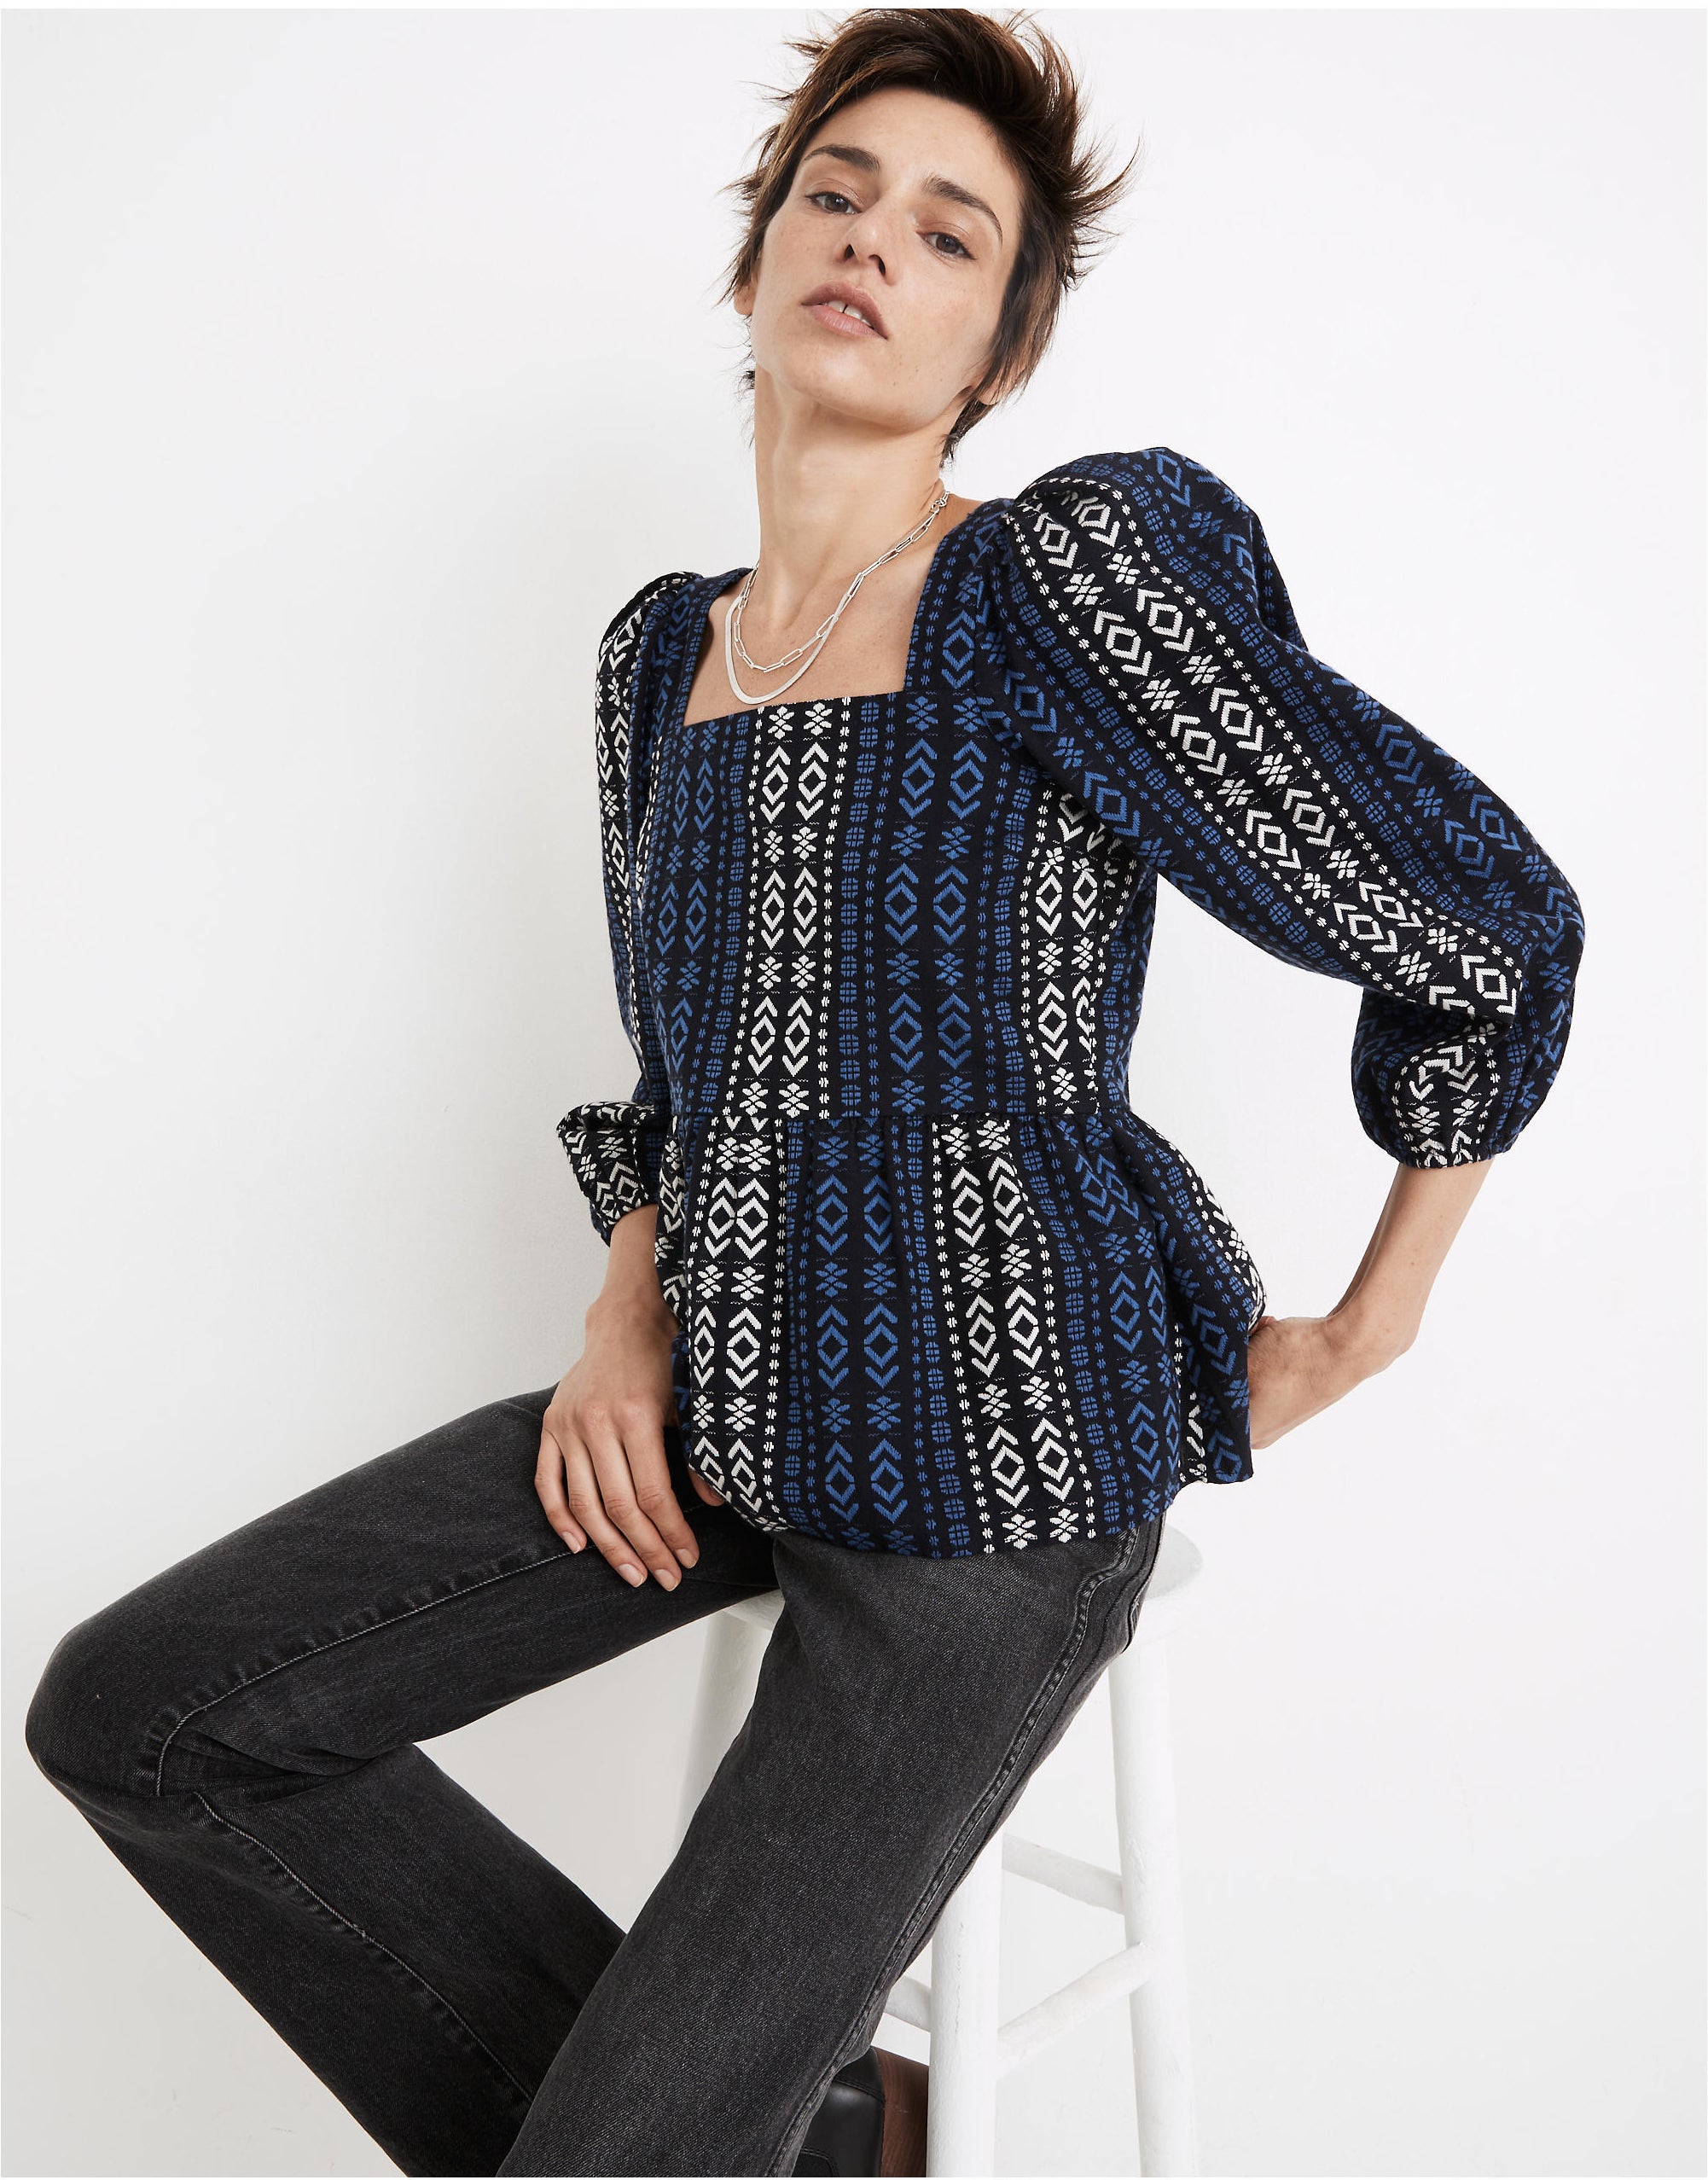 model wearing the puff-sleeve peplum top with black, blue, and white graphic vertical stripe pattern